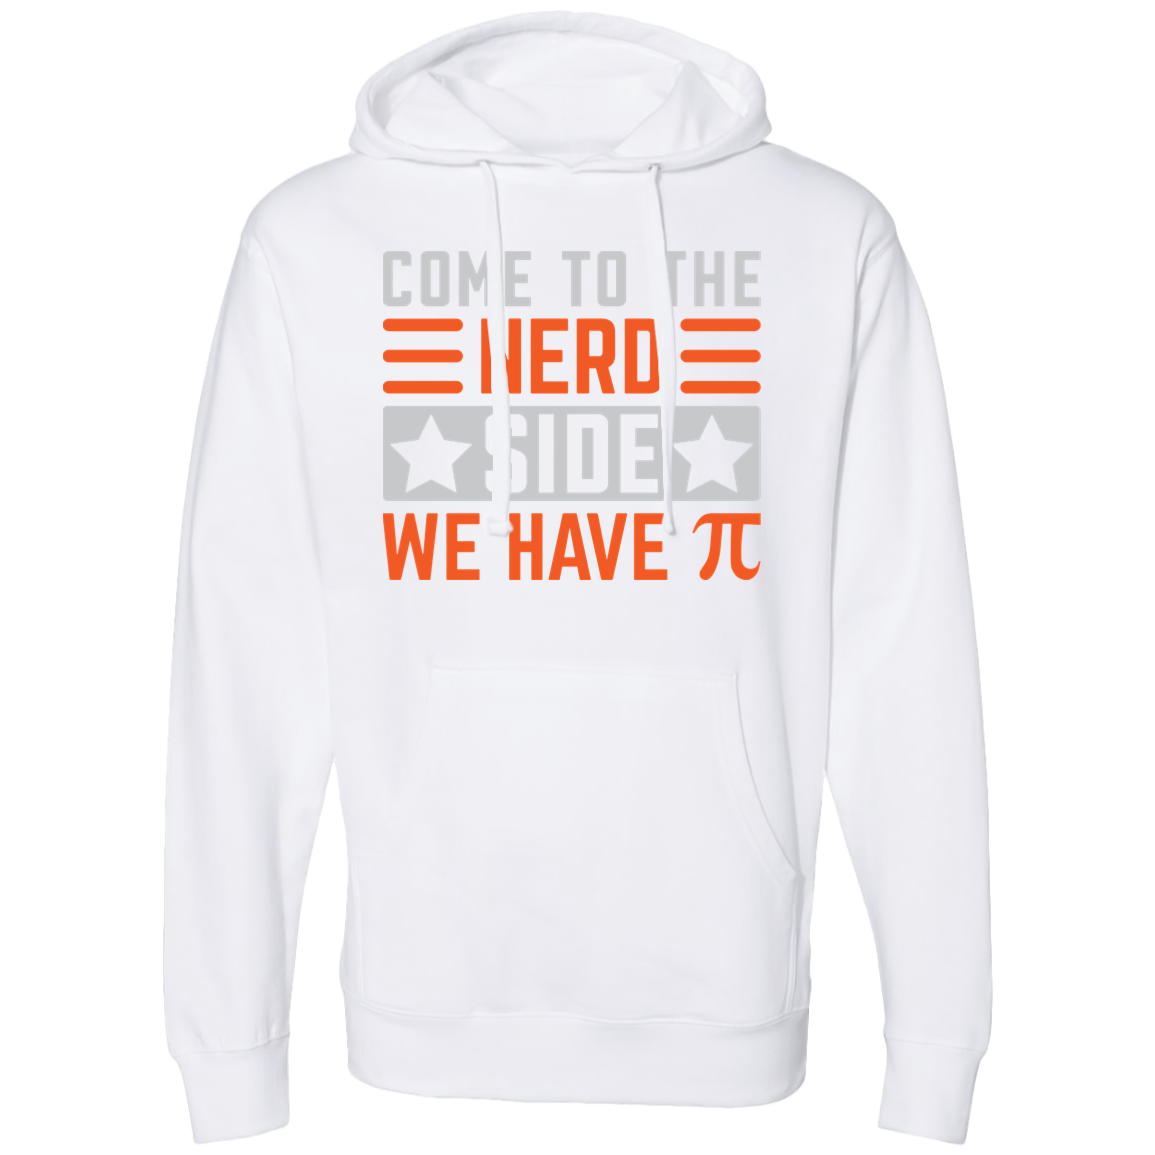 Come to the Nerd Side Midweight Hooded Sweatshirt - Gifternaut